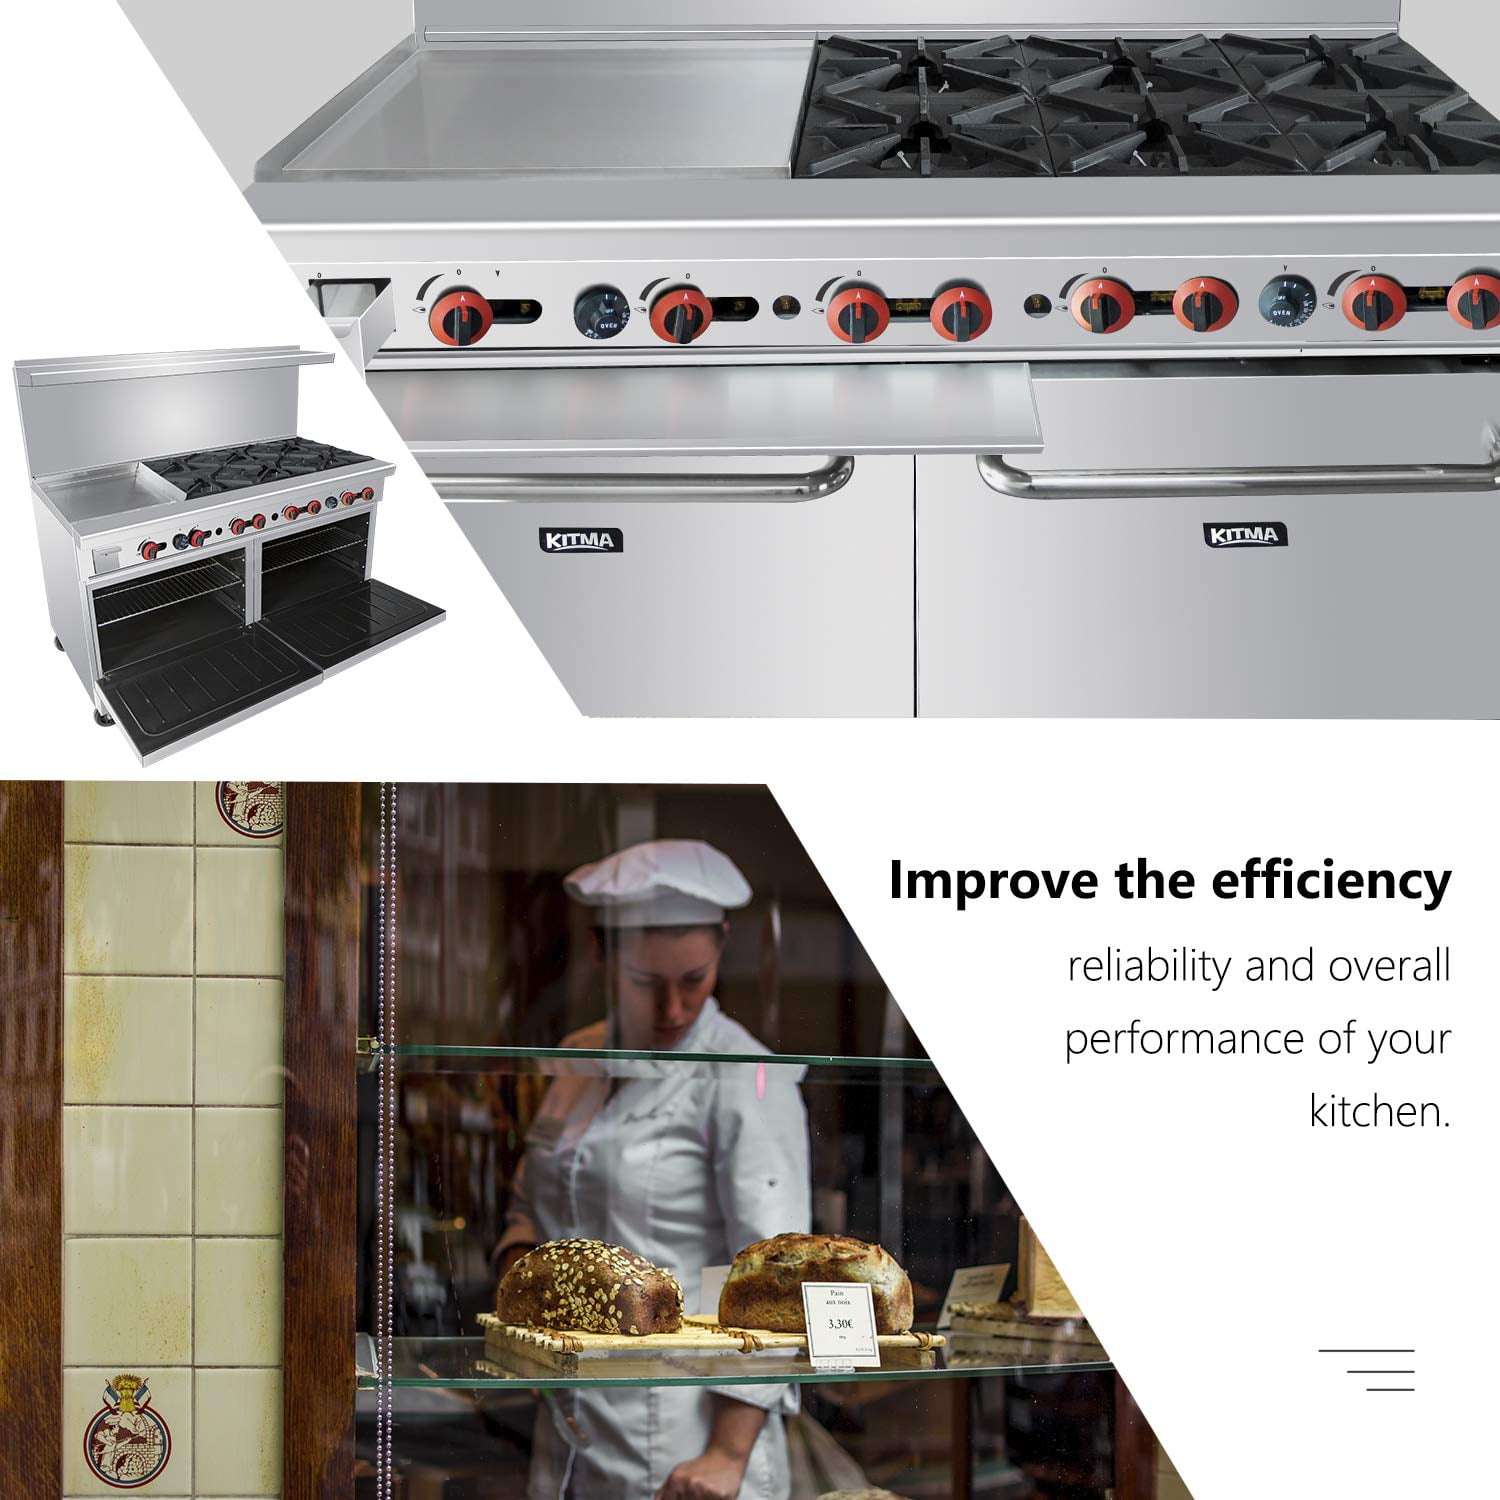 ELEKTHERMAX gas stove with 6 burners, electric oven, 2 pan support grids  and 1 griddle plate